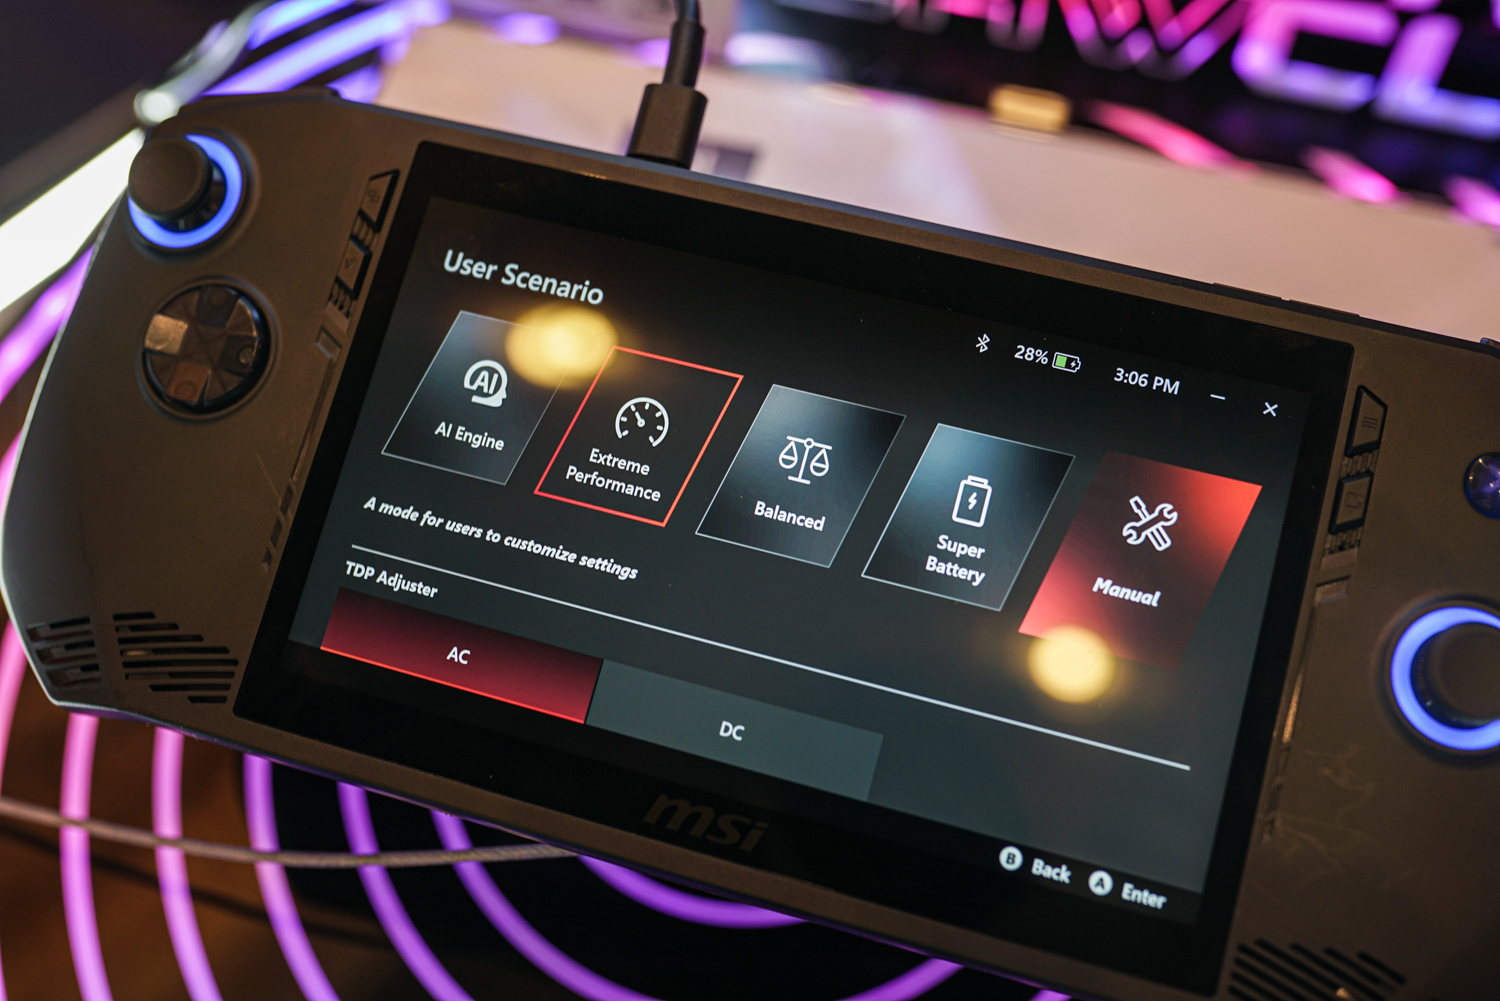 Power modes on the MSI Claw handheld.